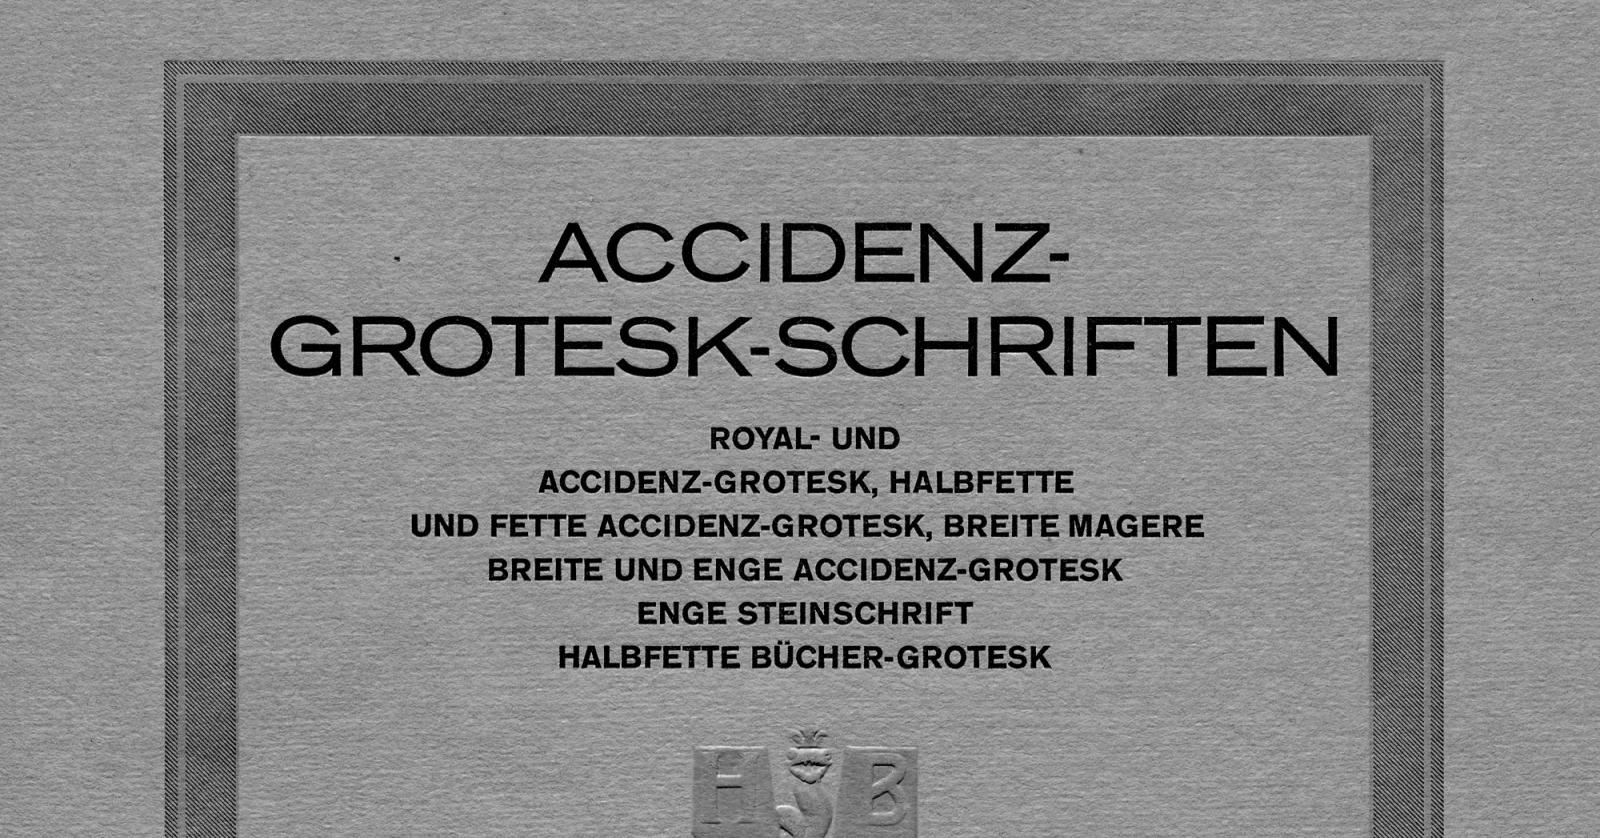 More information about "New details about the origins of Akzidenz-Grotesk"